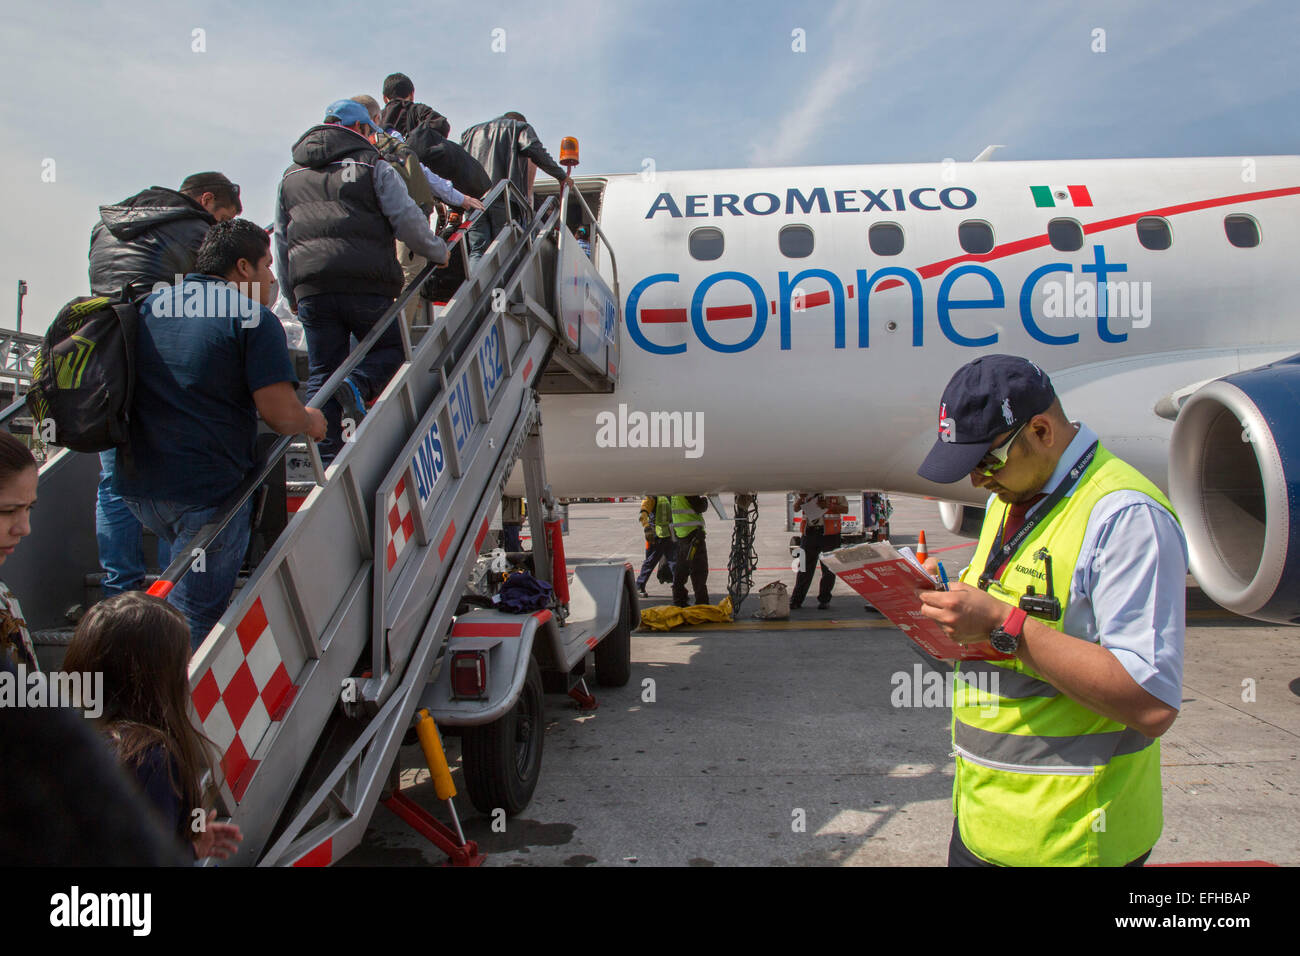 Mexico City, Mexico - Passengers board an AeroMexico Connect plane at the Mexico City airport for a flight to Oaxaca. Stock Photo